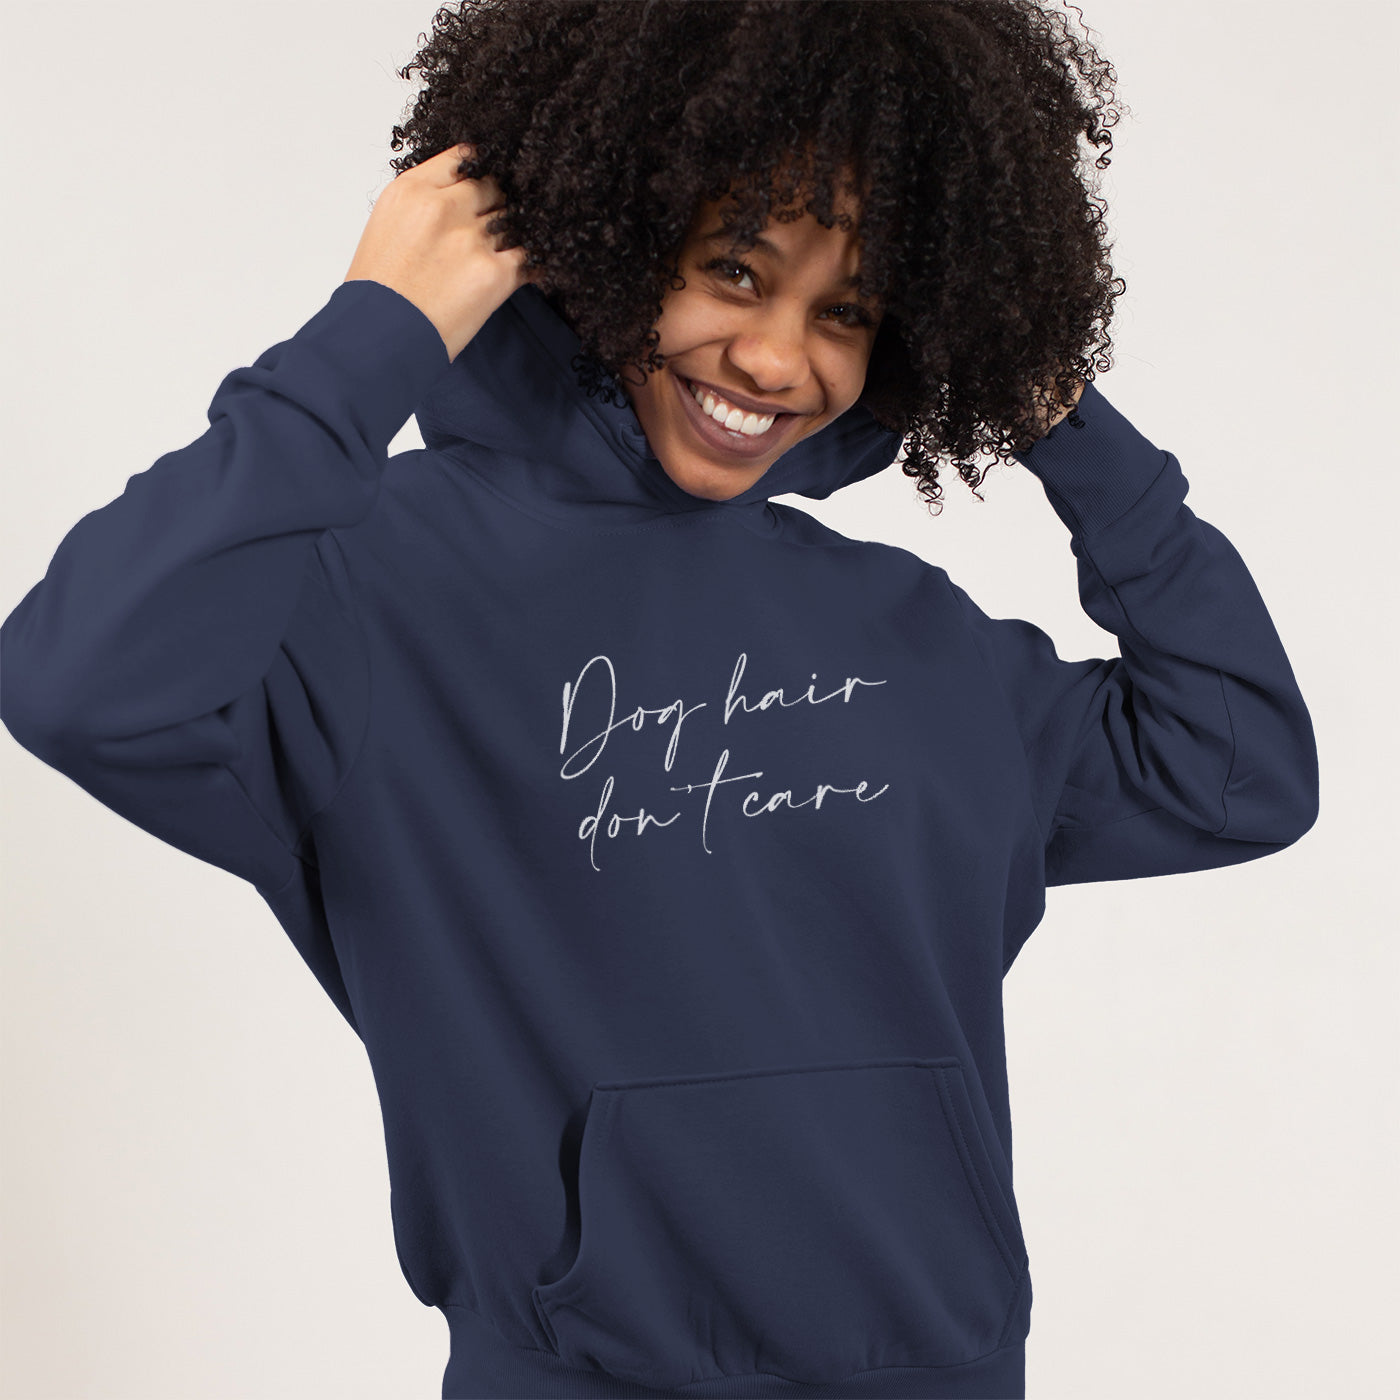 Dog hair, don't care Hoodie (Navy)